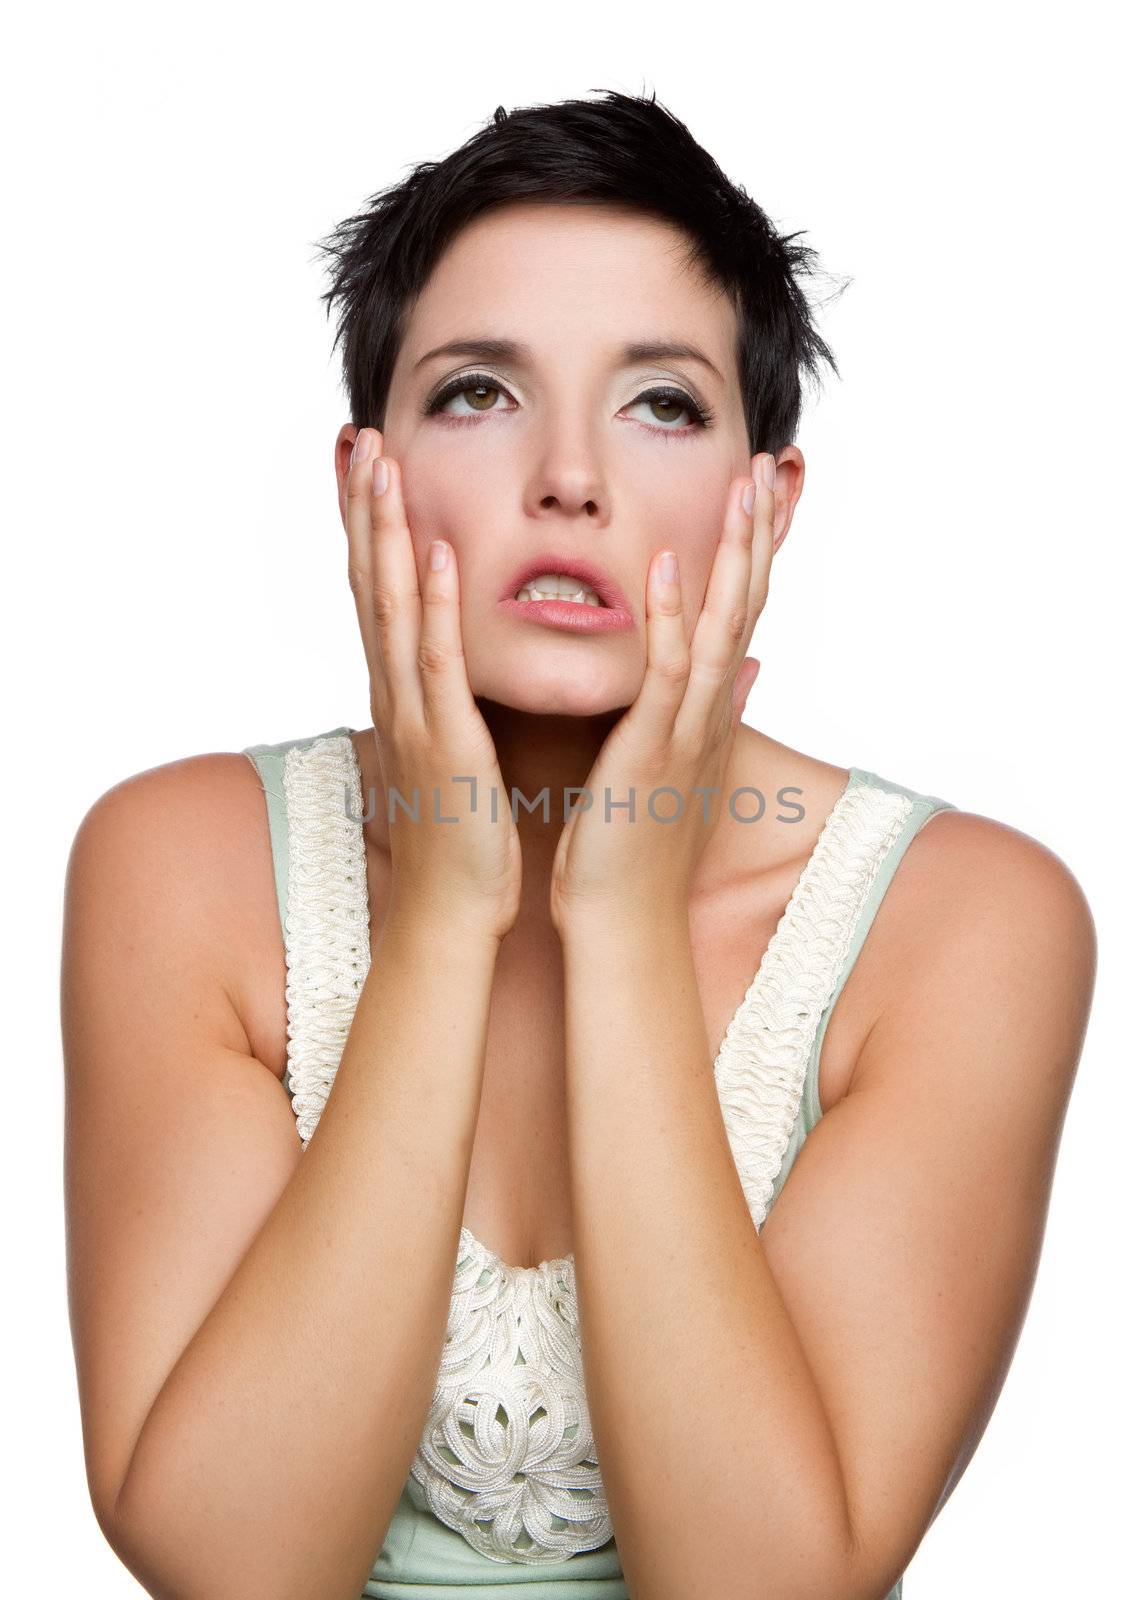 Frustrated Upset Woman by keeweeboy